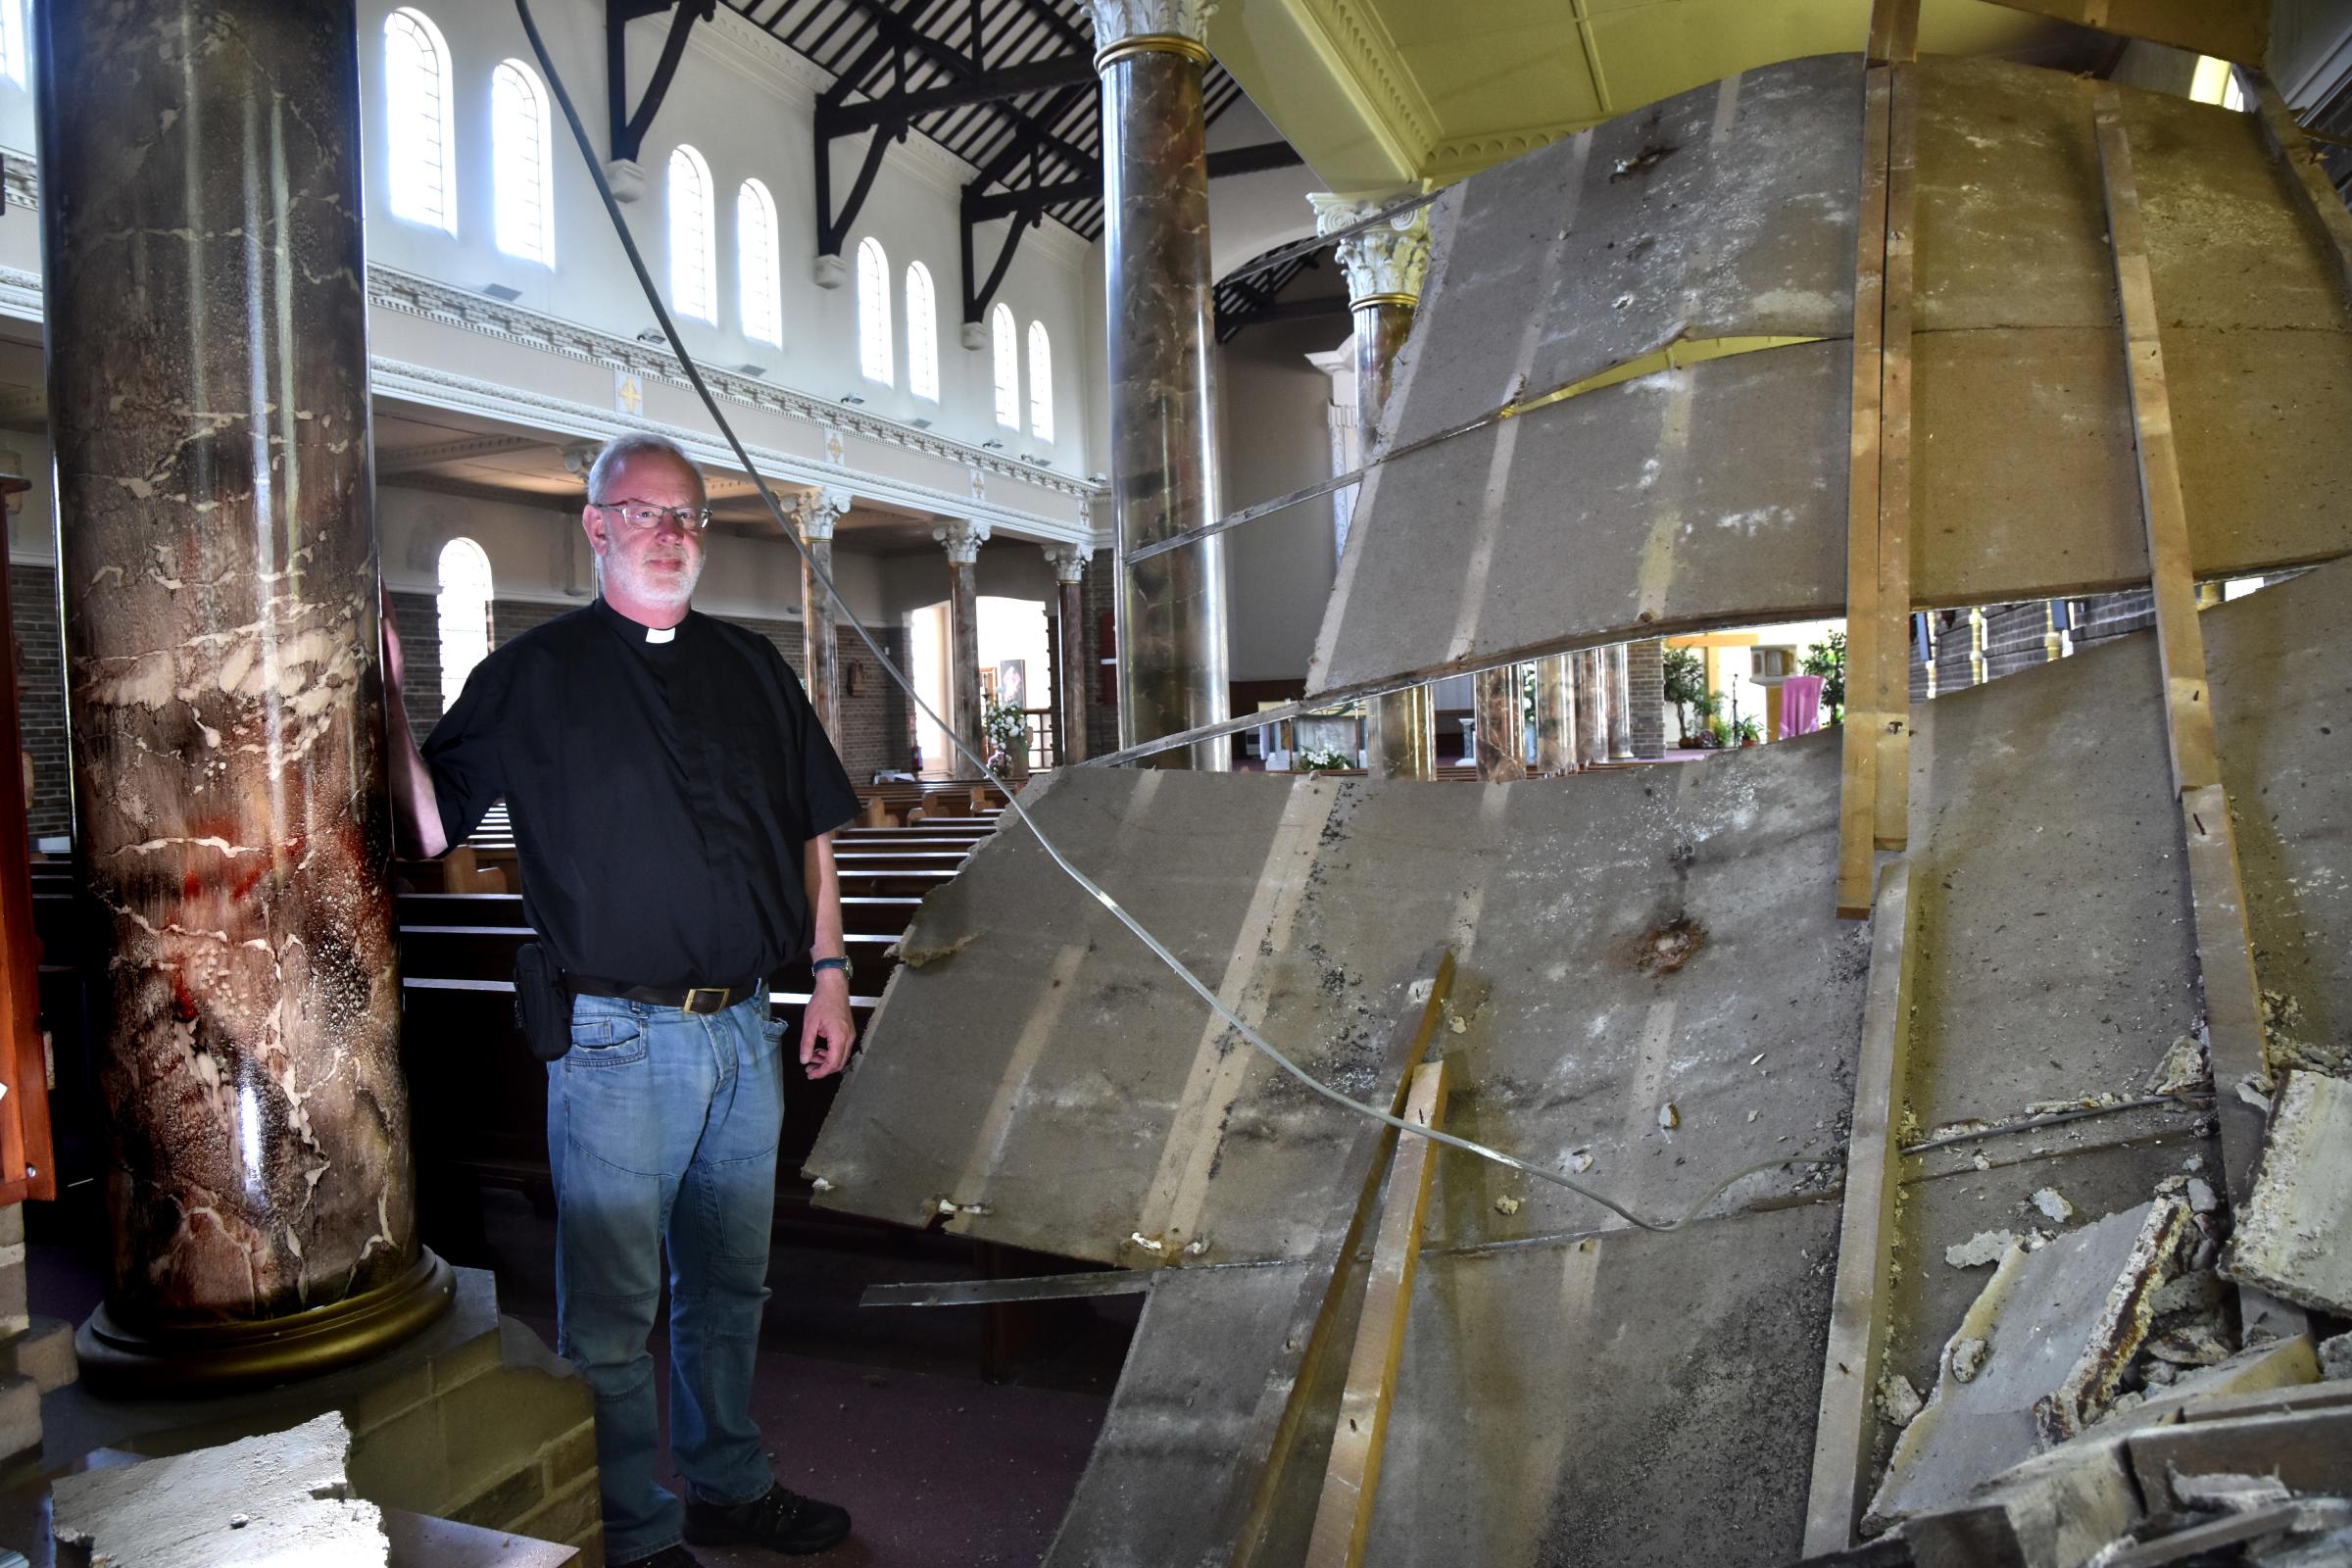 'It sounded like an earthquake' - roof collapses at Our Lady’s Catholic Church, York